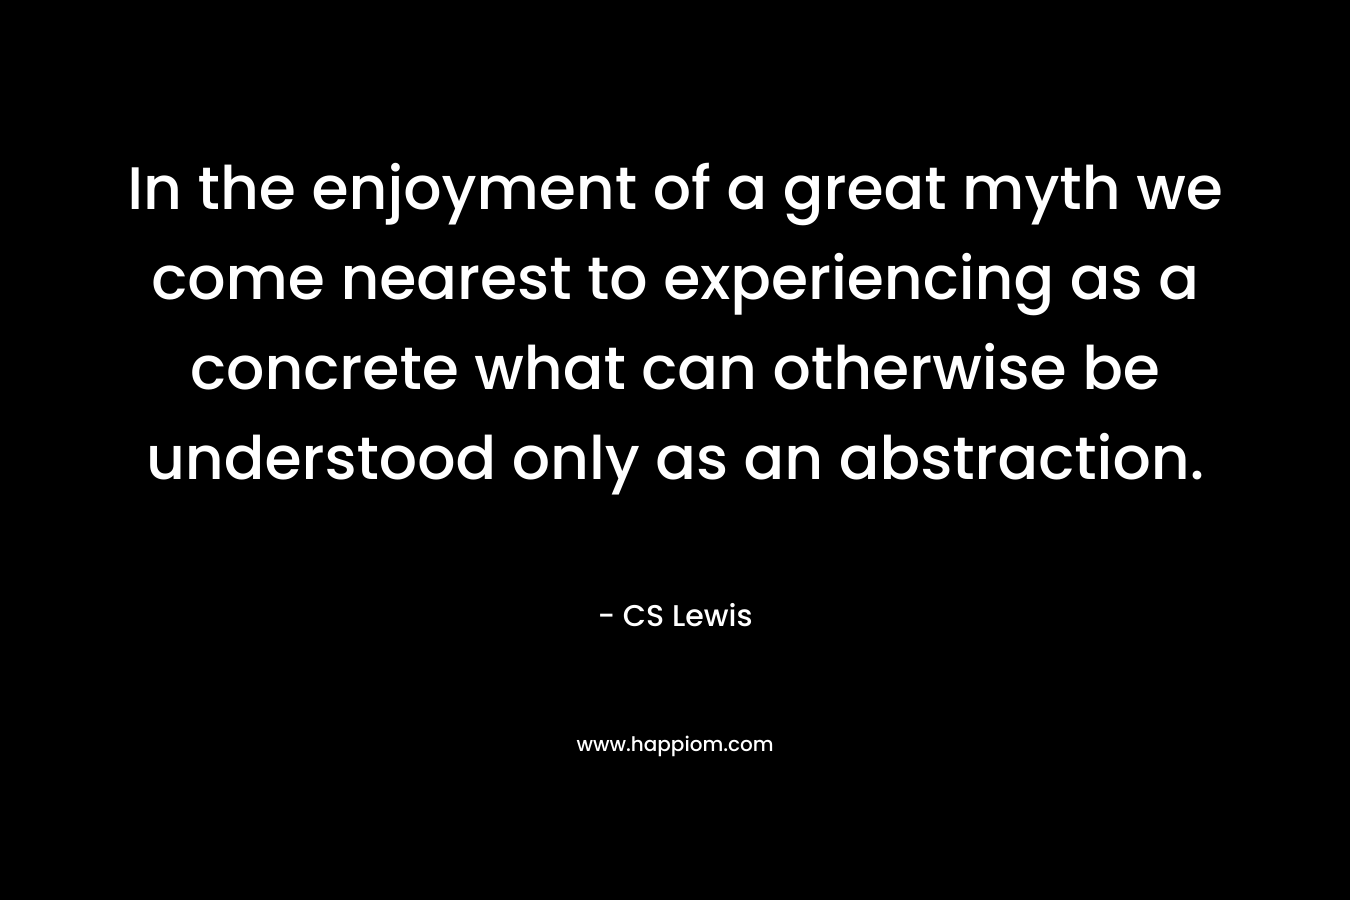 In the enjoyment of a great myth we come nearest to experiencing as a concrete what can otherwise be understood only as an abstraction.